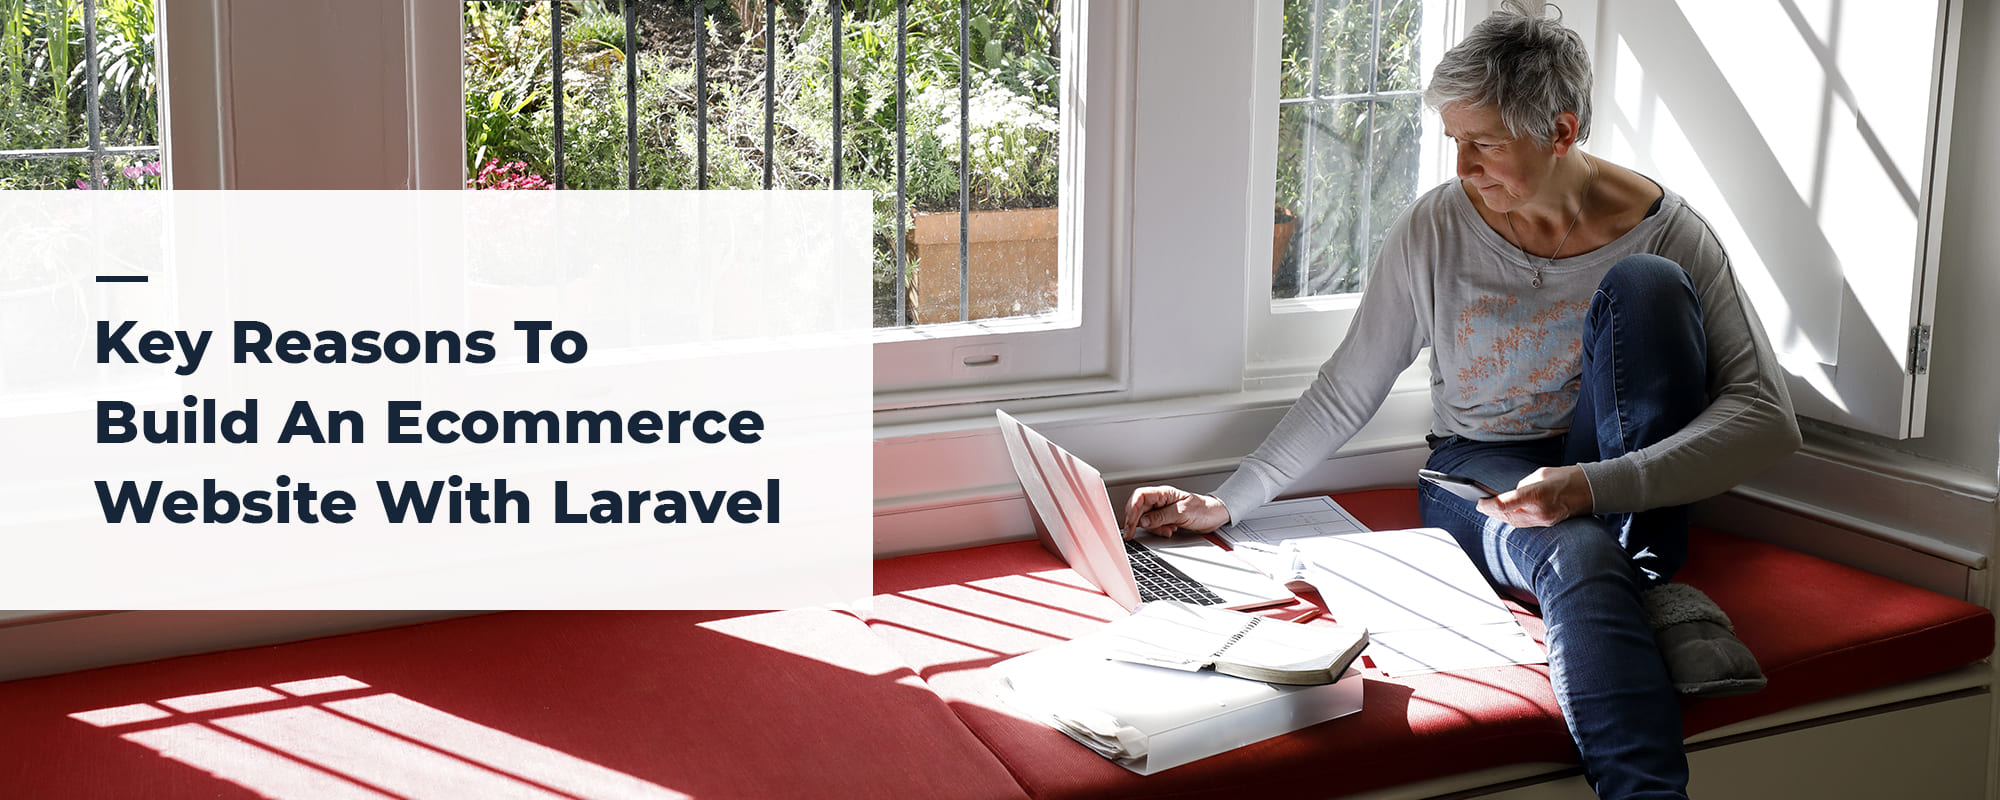 Key Reasons To Build an Ecommerce Website With Laravel